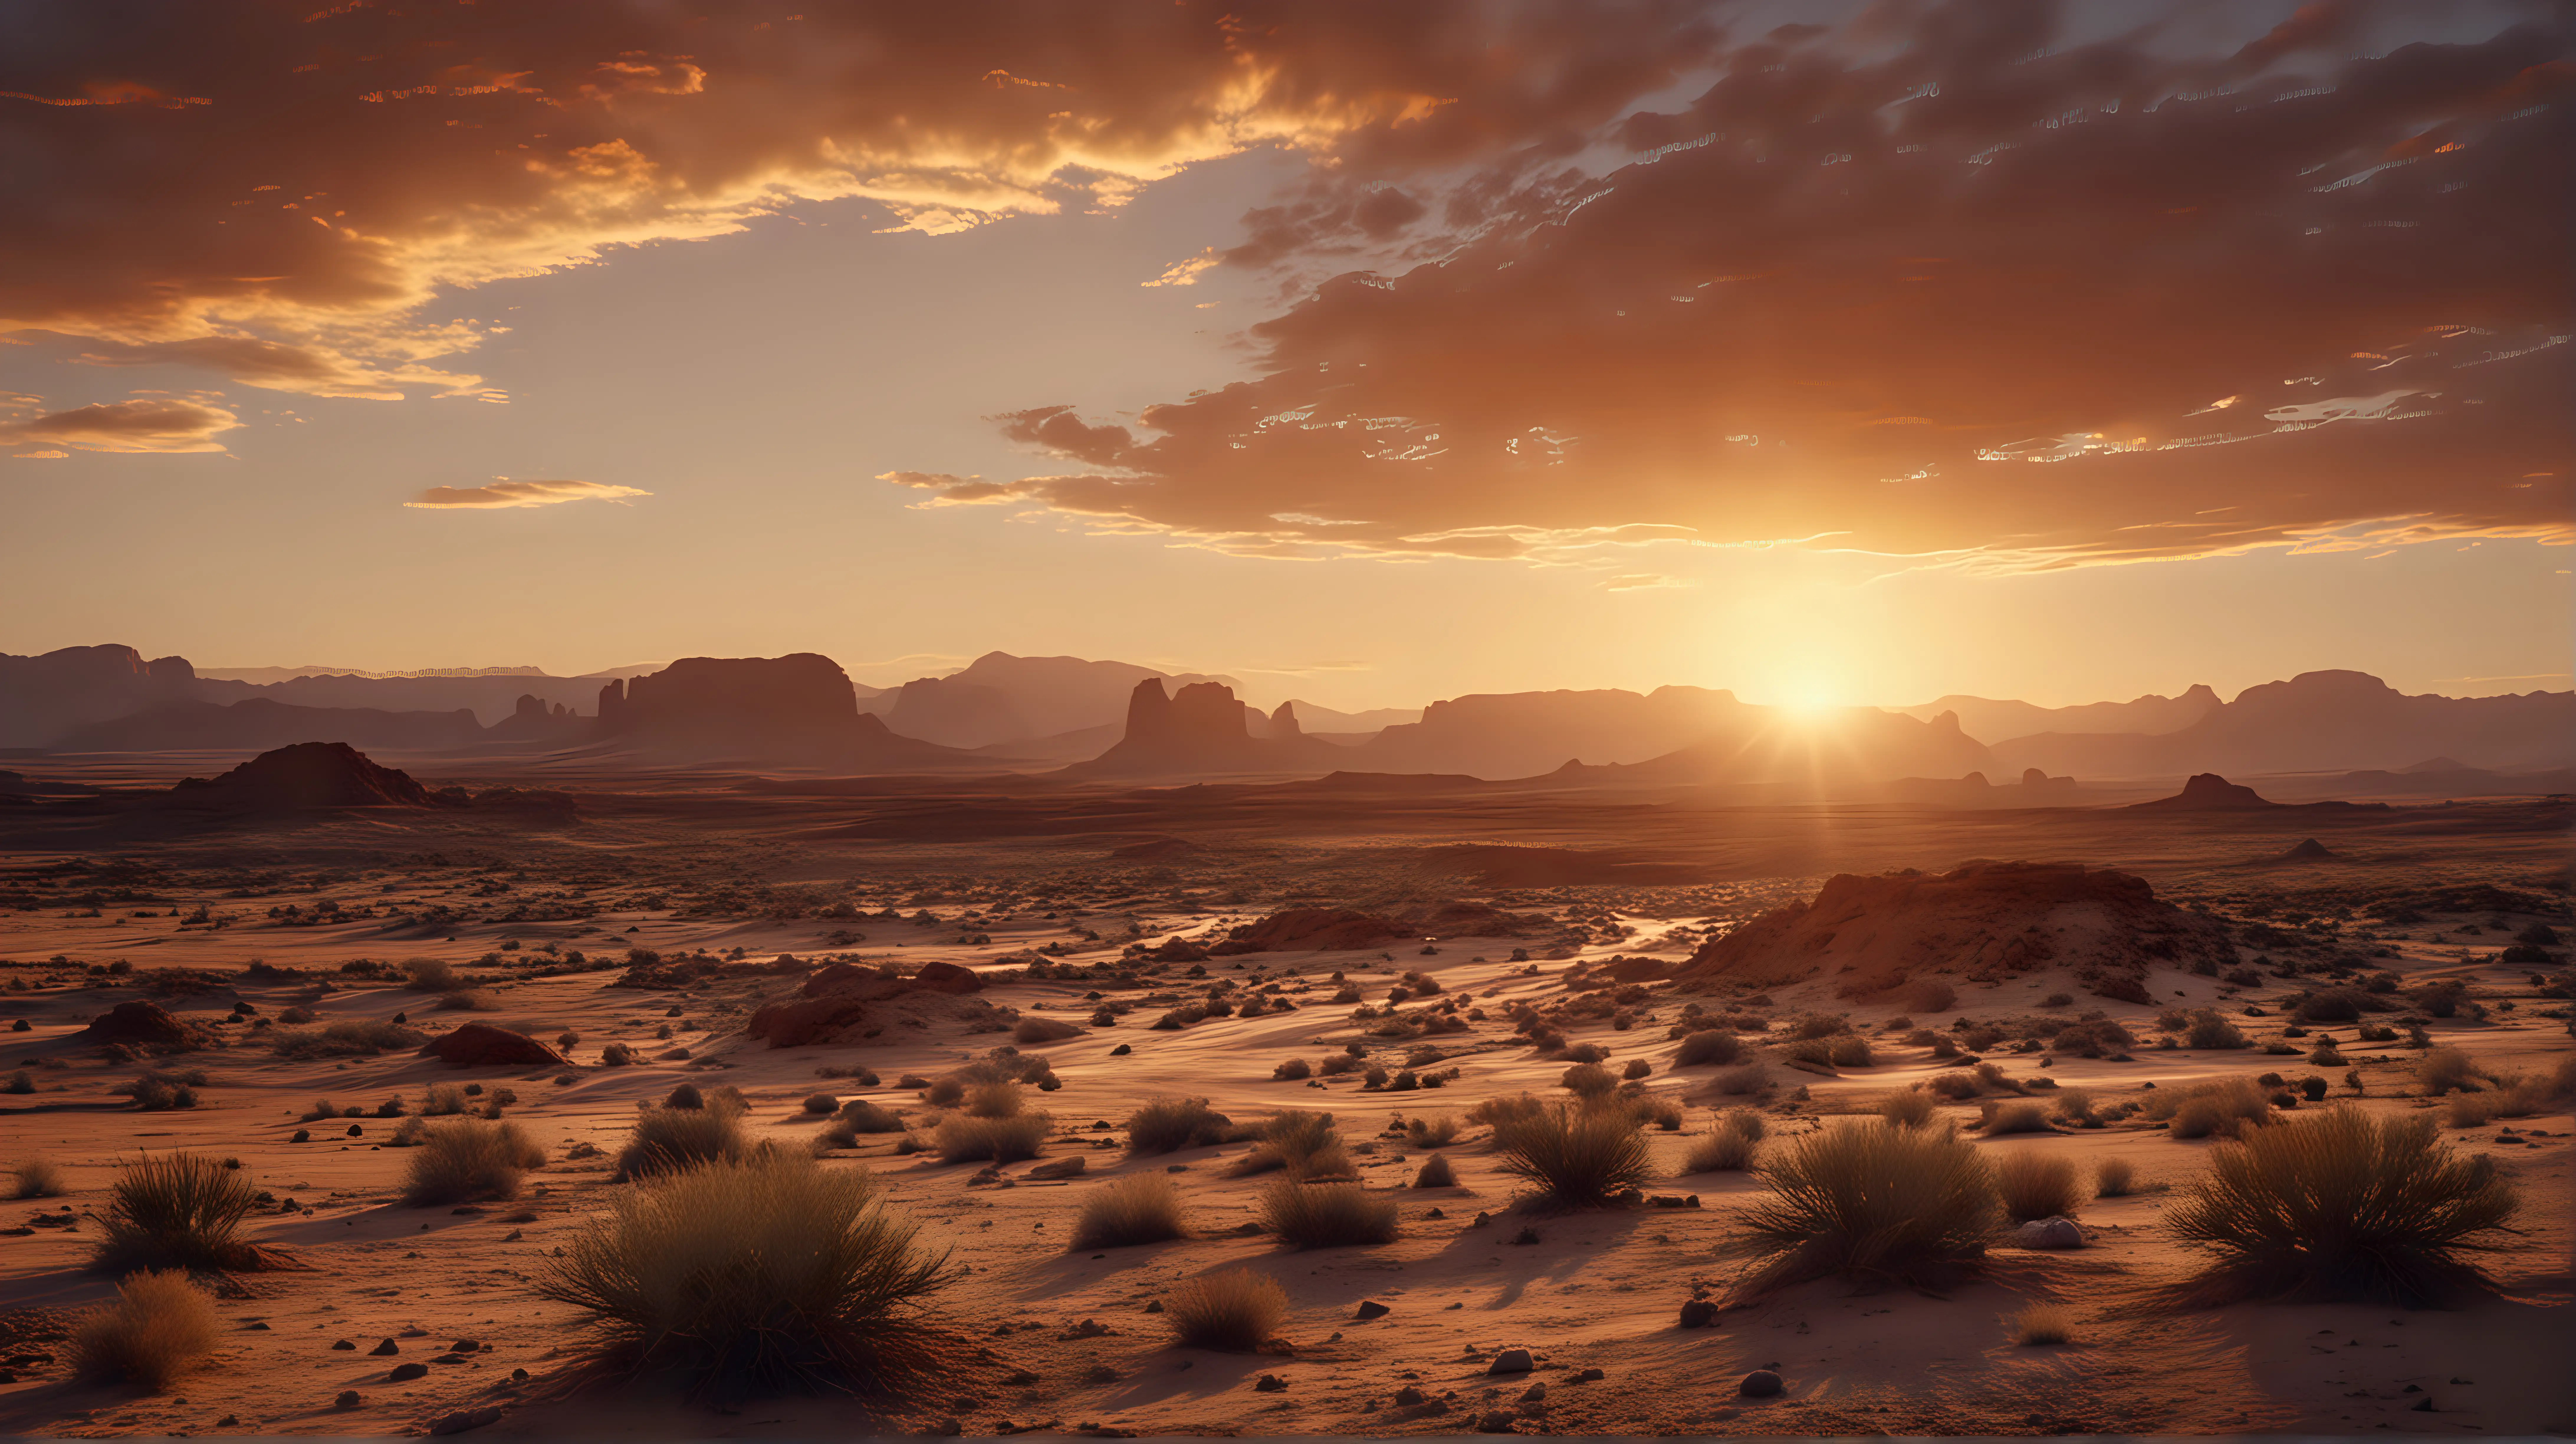 cinematic image of an american desert at sunset. Beautiful.

